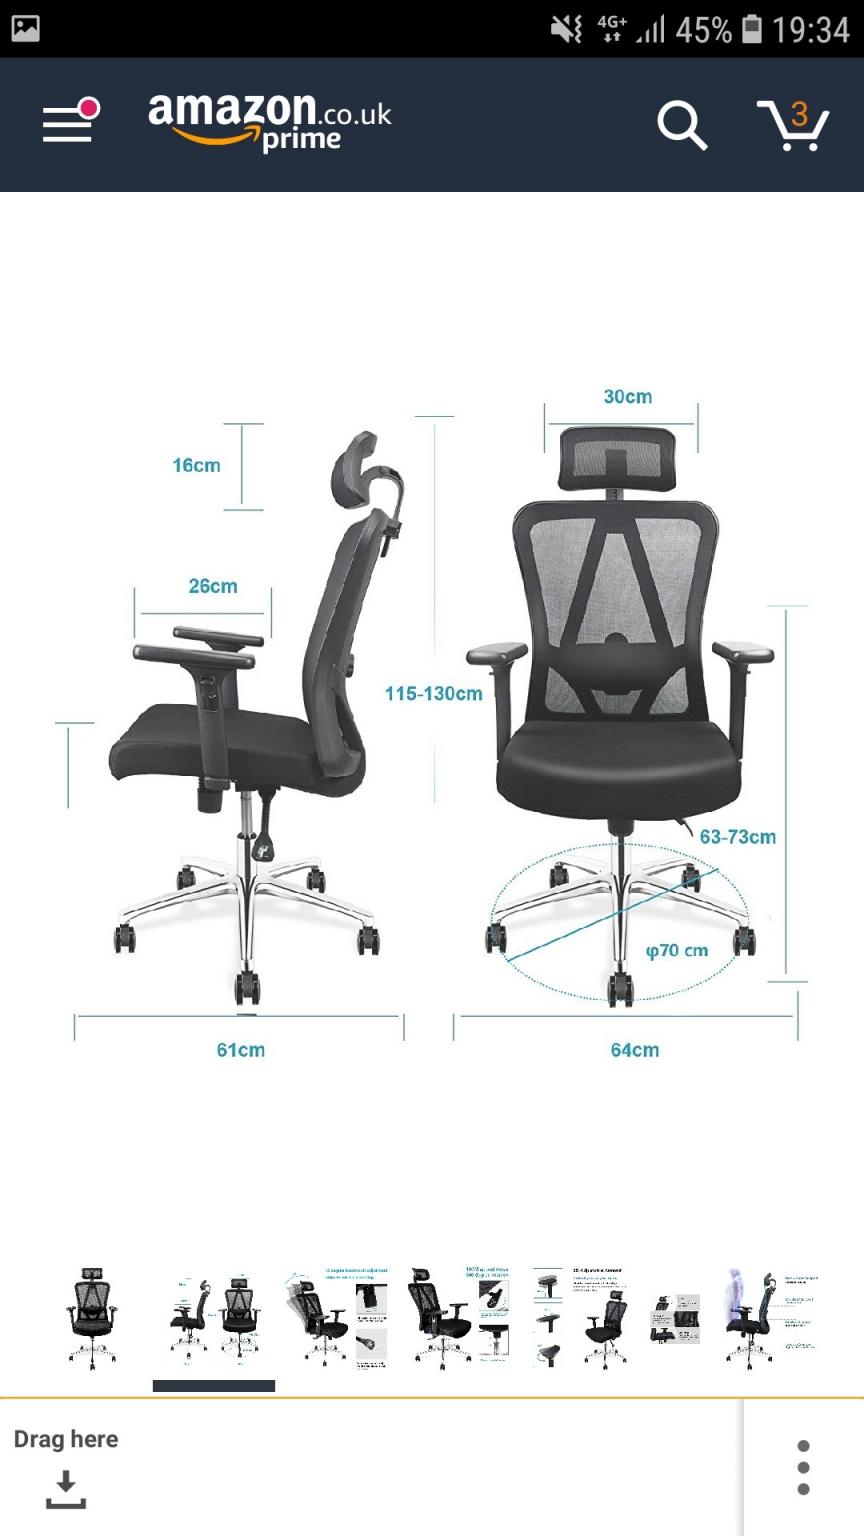 Mfavour Ergonomic Office Chair In, Mfavour Office Chair Ergonomic With Adjustable Arms And Back Support